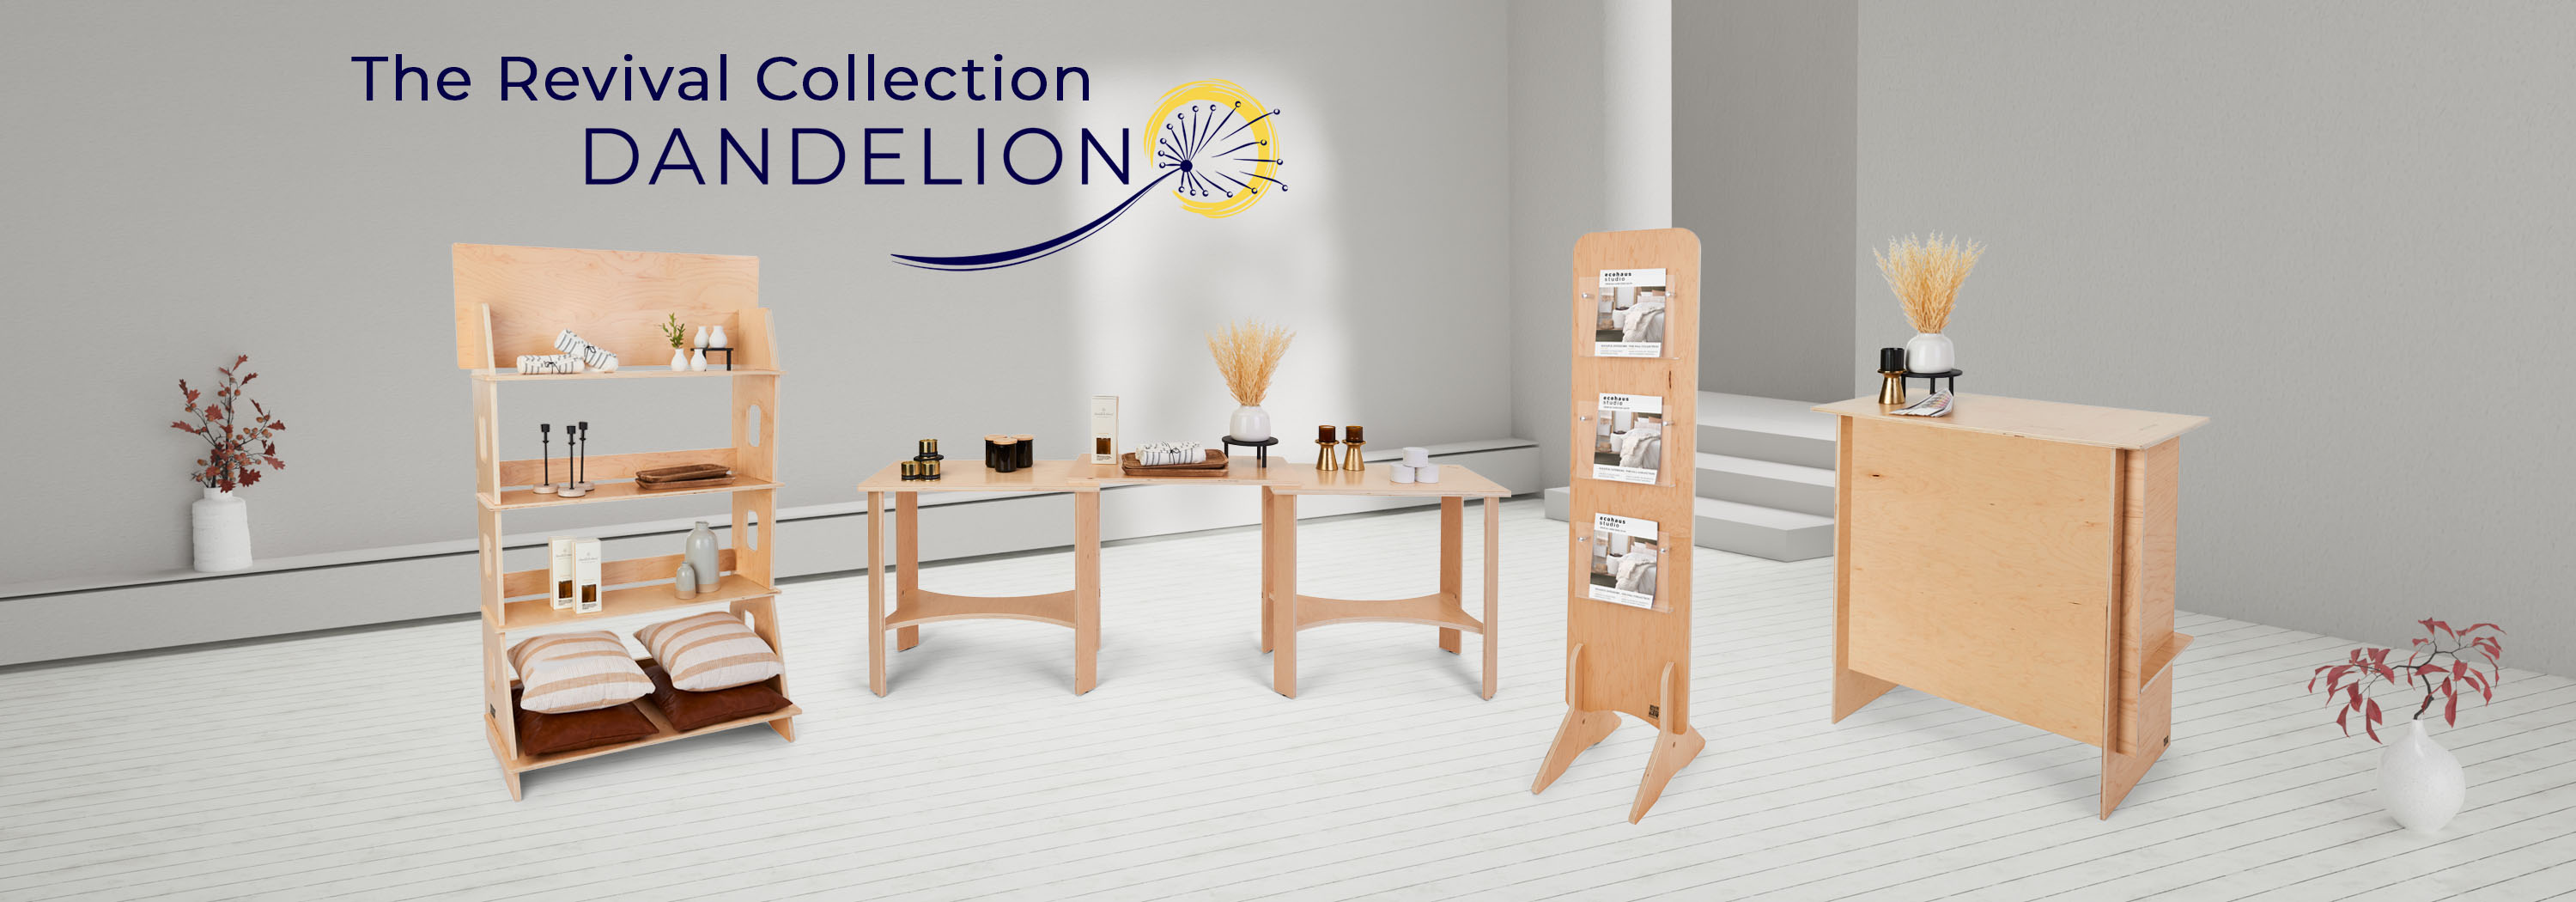 Dandelion collection with eco-friendly construction